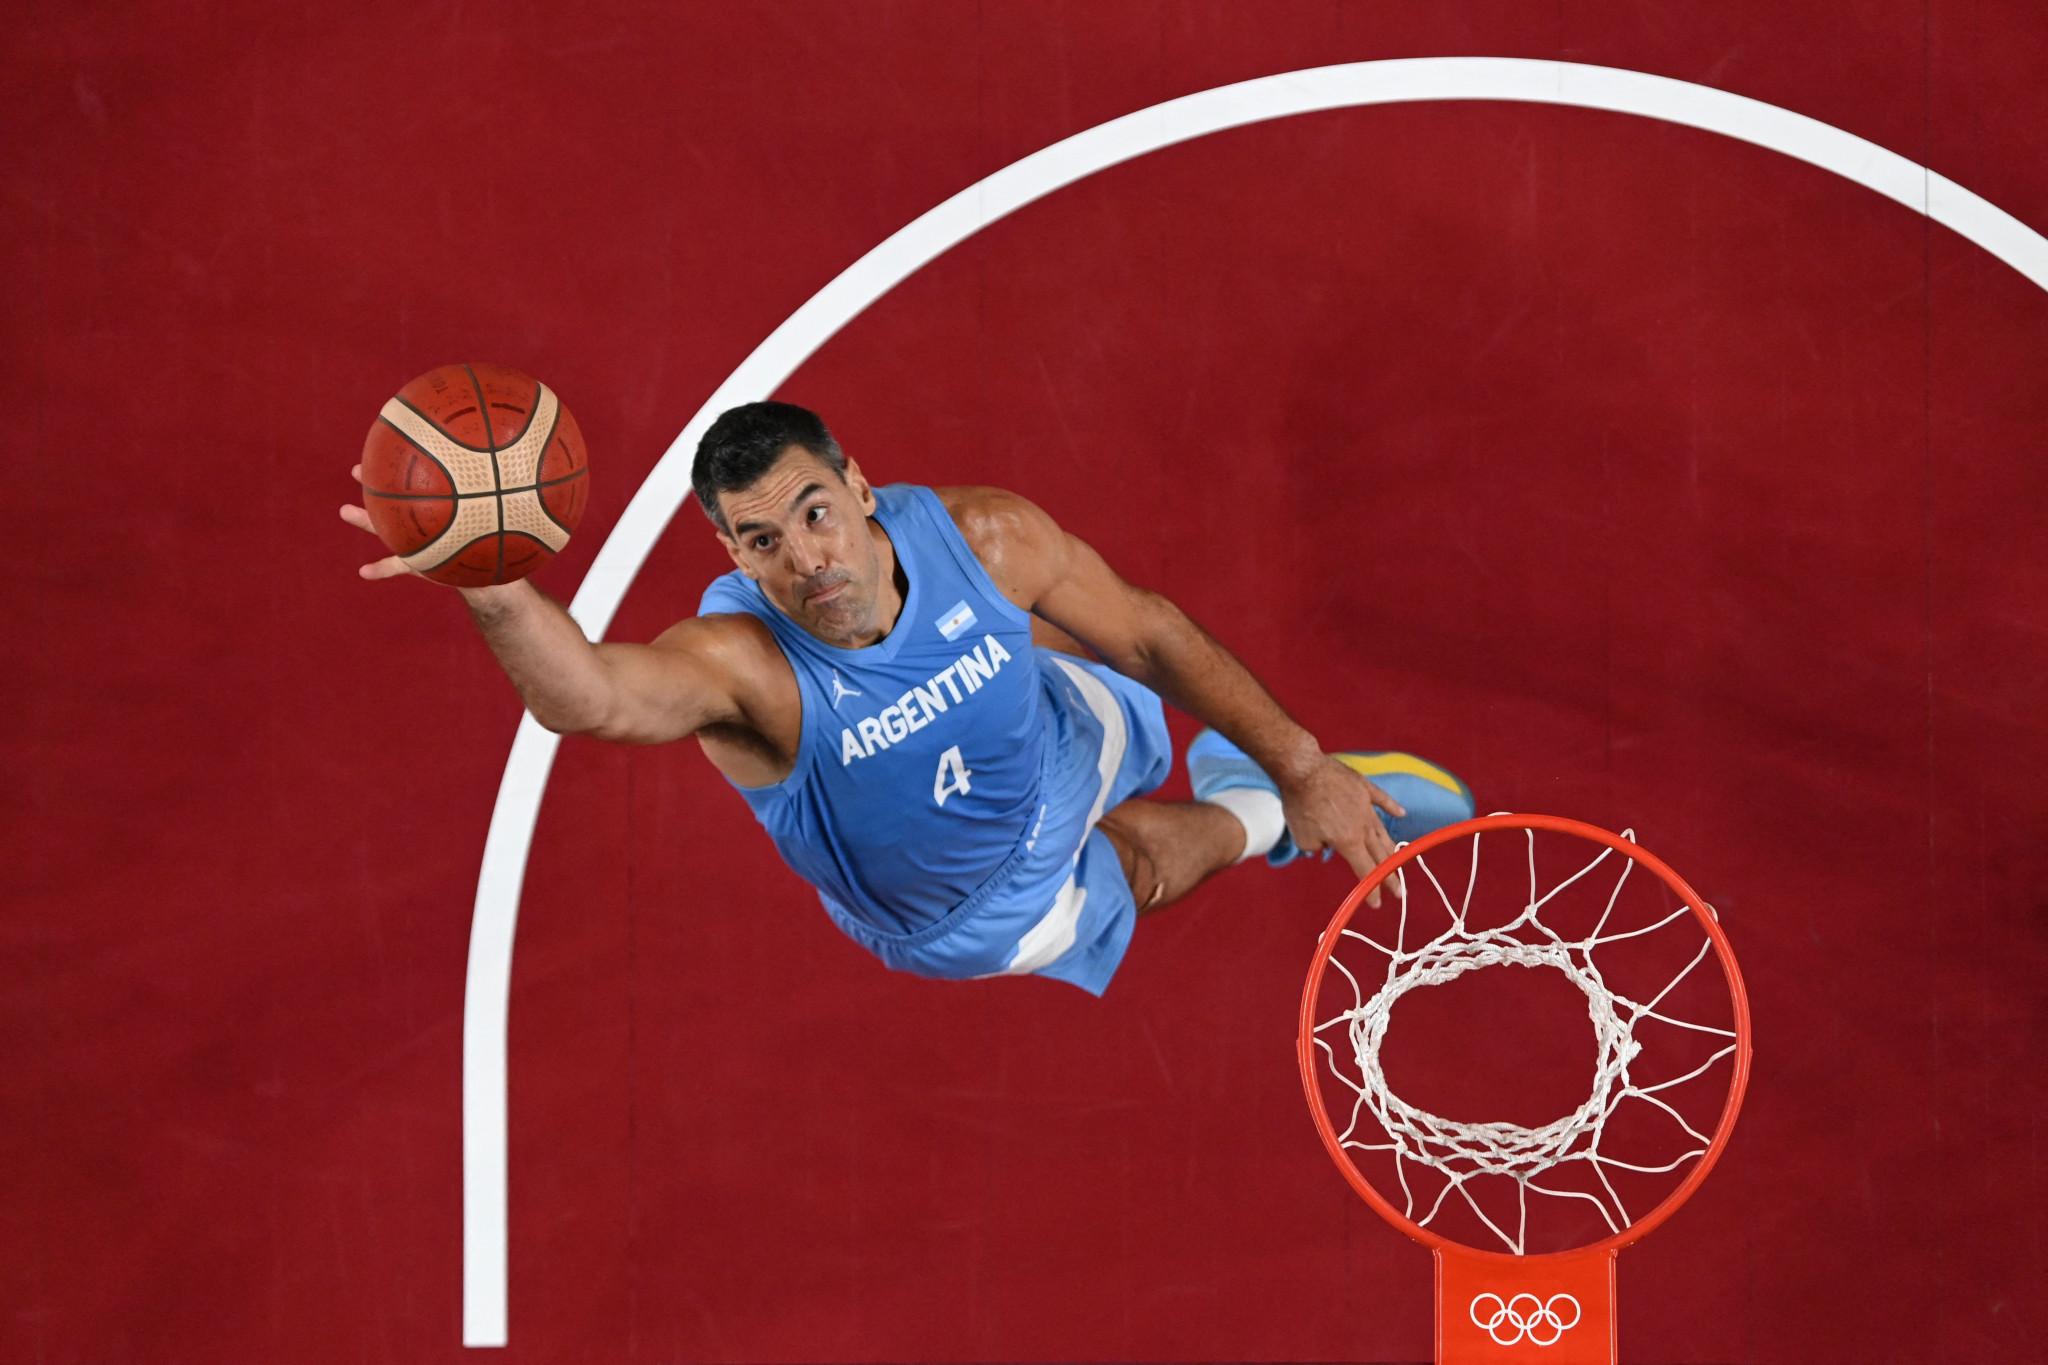 Men’s basketball Olympic Pre-Qualification Tournaments to be held in four continents